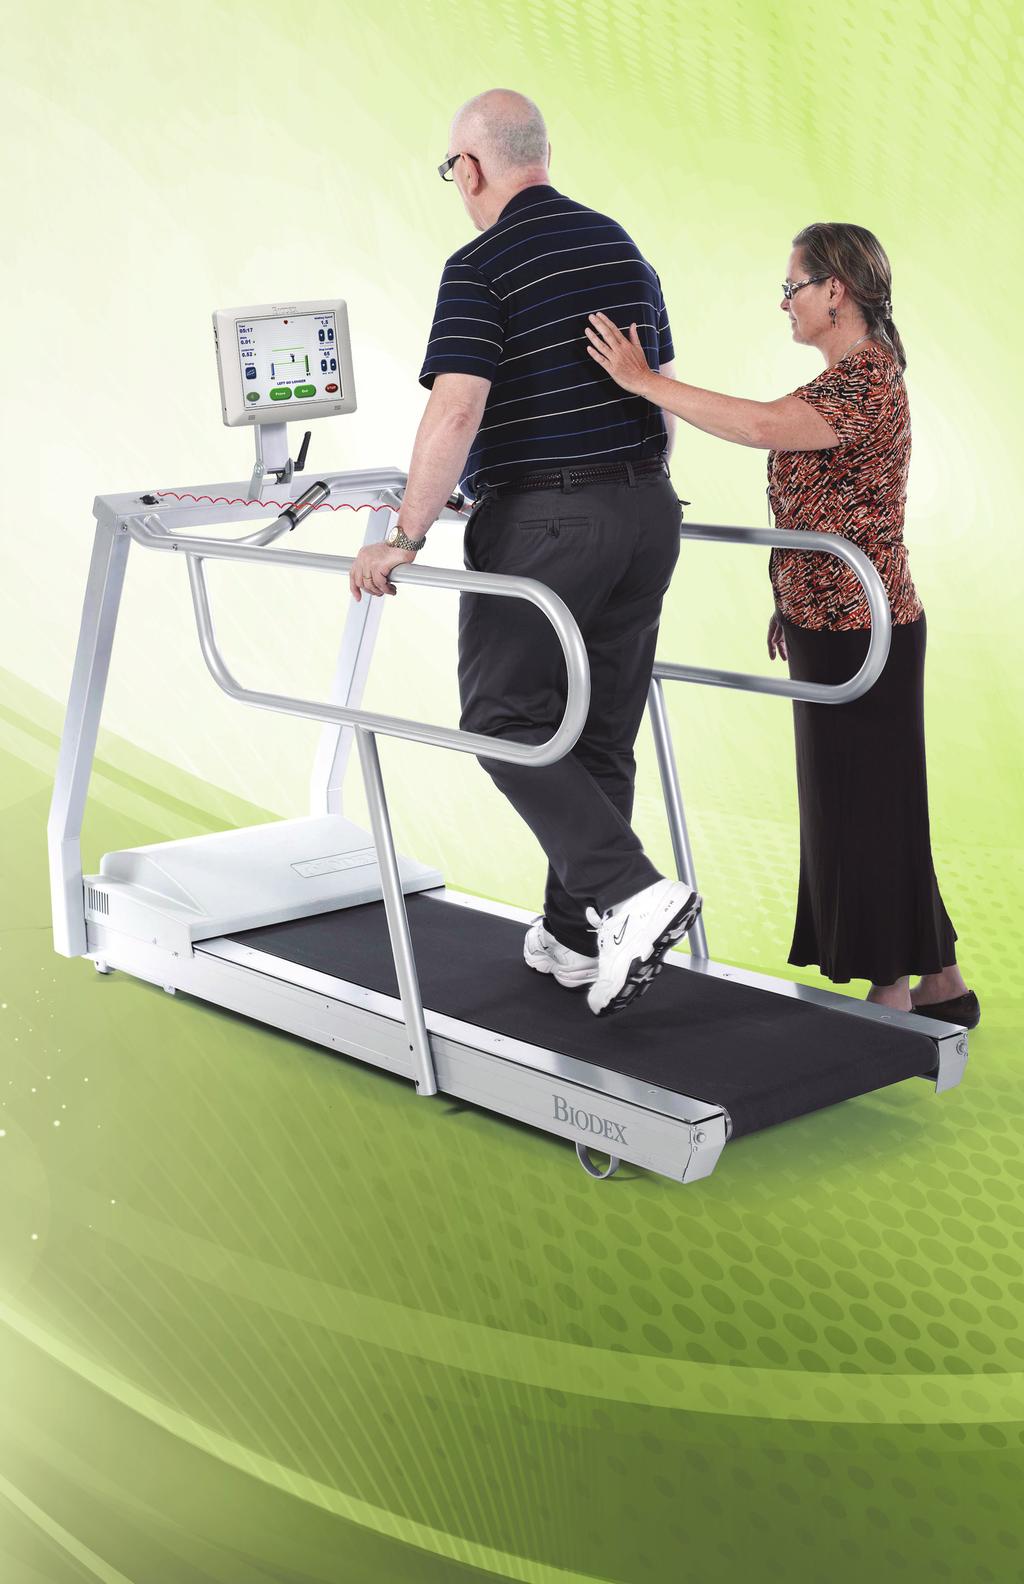 Gait Trainer 3 Despite its resemblance to an ordinary treadmill, the Gait Trainer differs in ways that illustrate its specialized rehabilitation design for patients with neurological impairments such